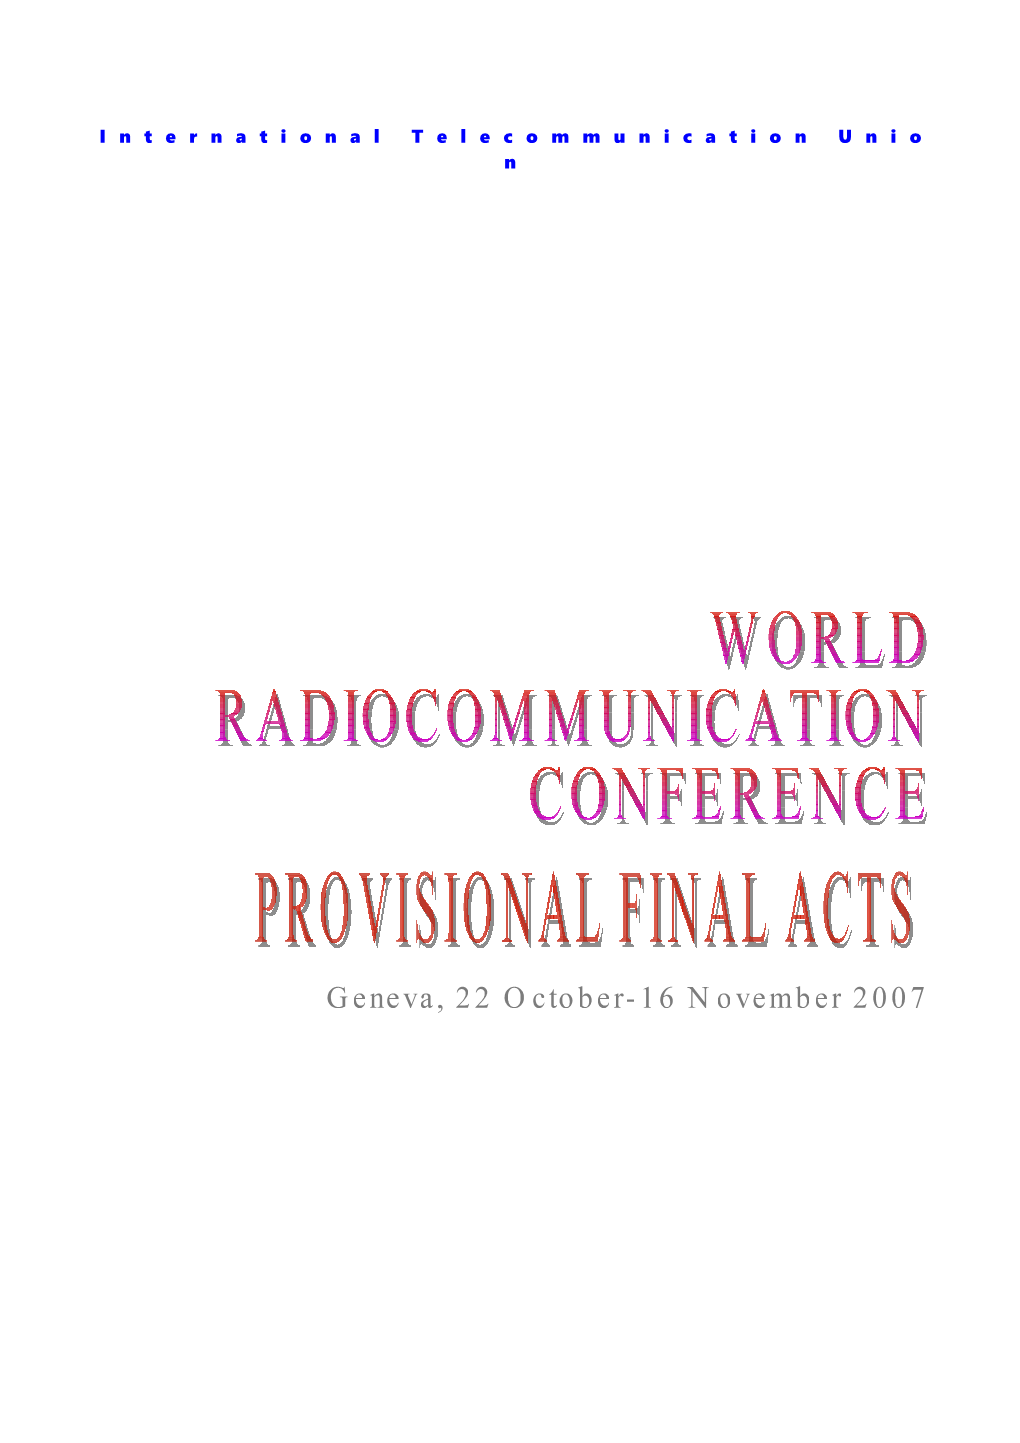 RECOMMENDATION 723 (WRC-03): Frequency Allocations